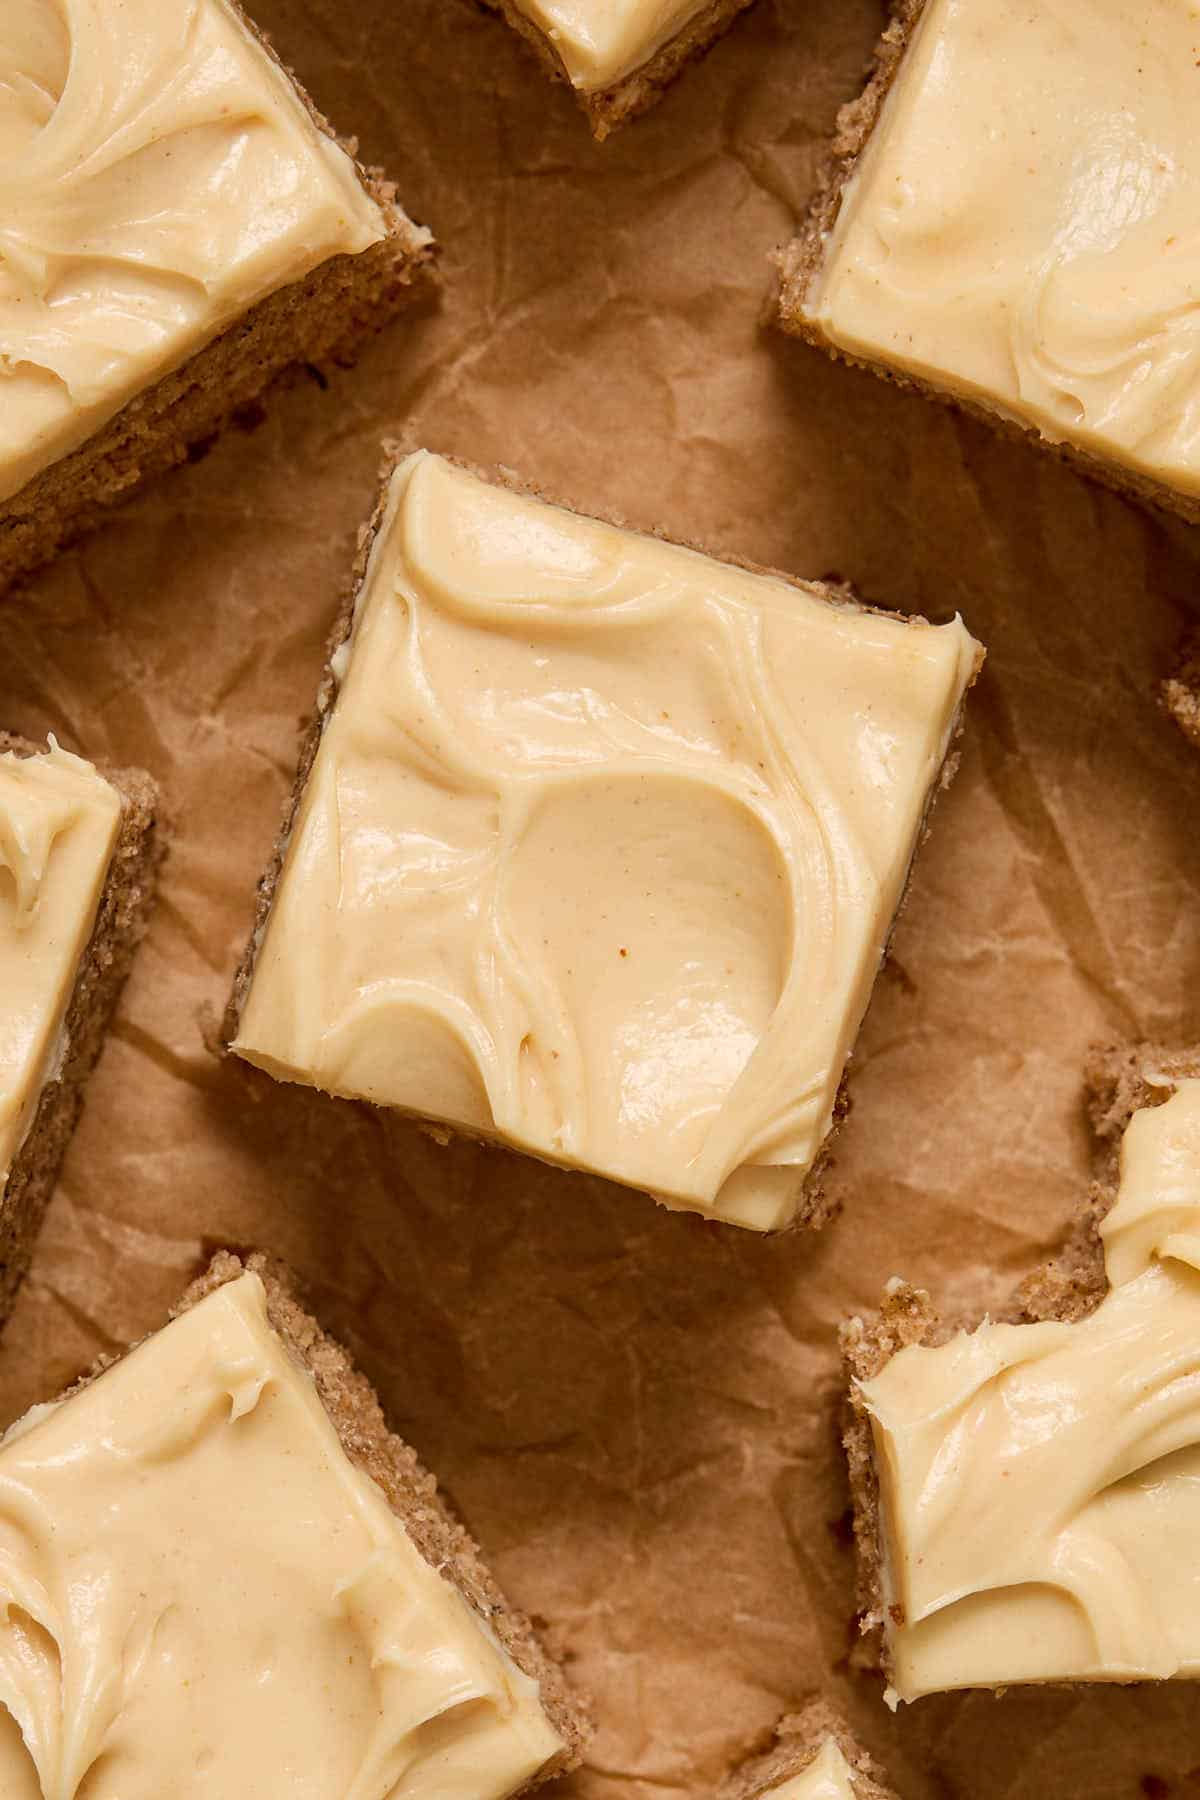 Overhead view of a piece of cake topped with peanut butter frosting.